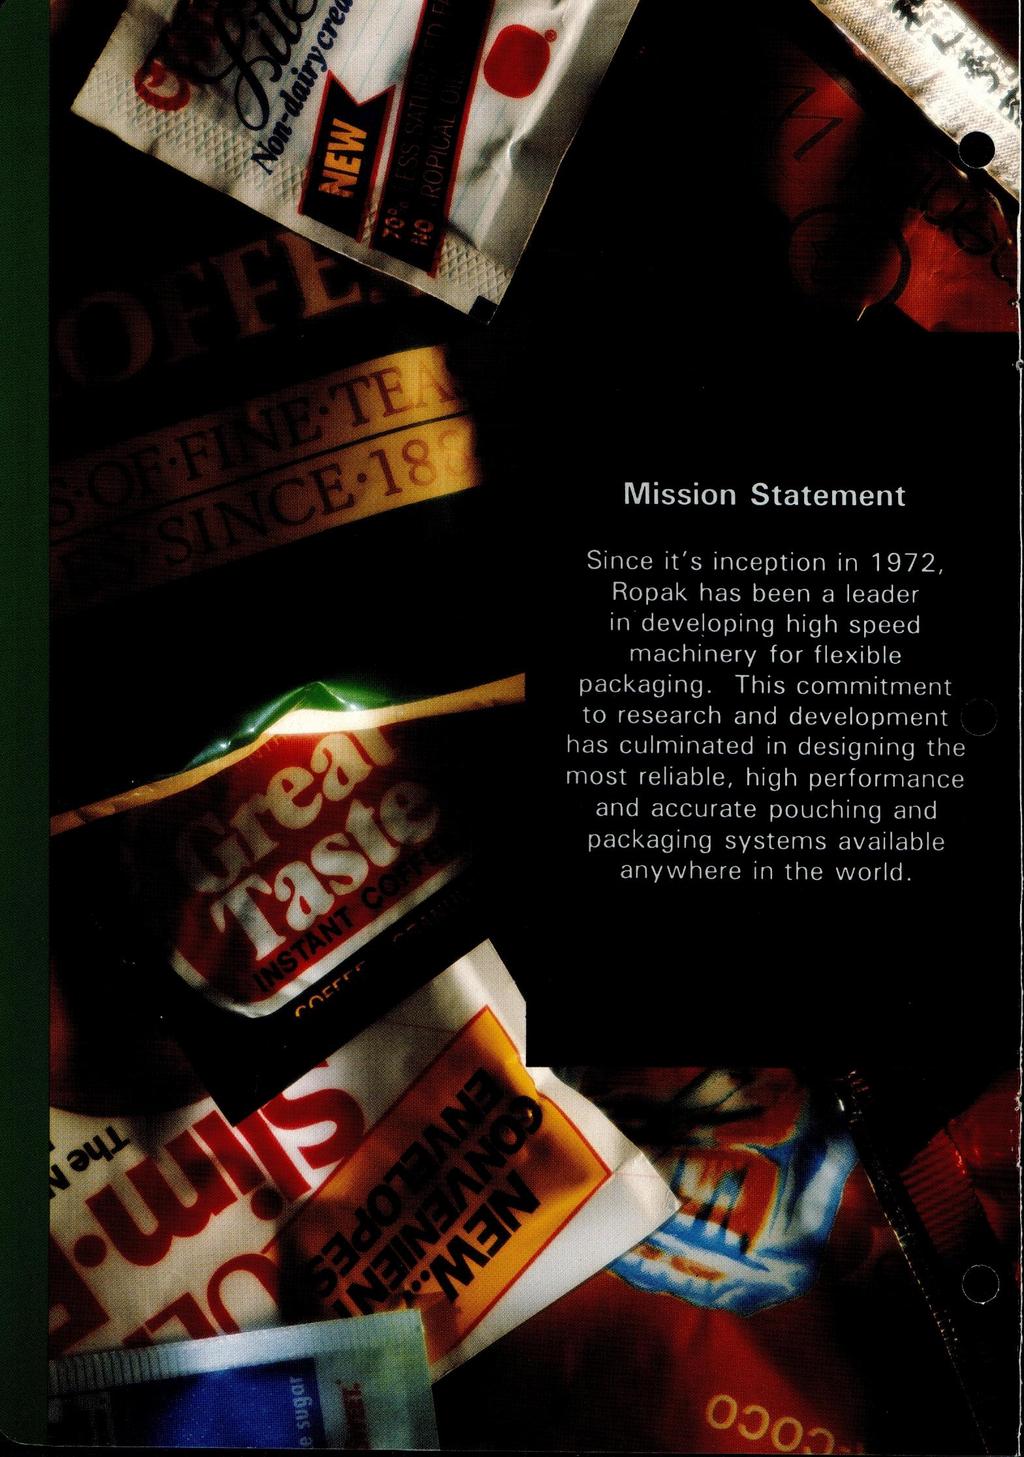 Mission Statement Since it's inception in 1972, Ropak has been a leader in developing high speed machinery for flexible packaging.